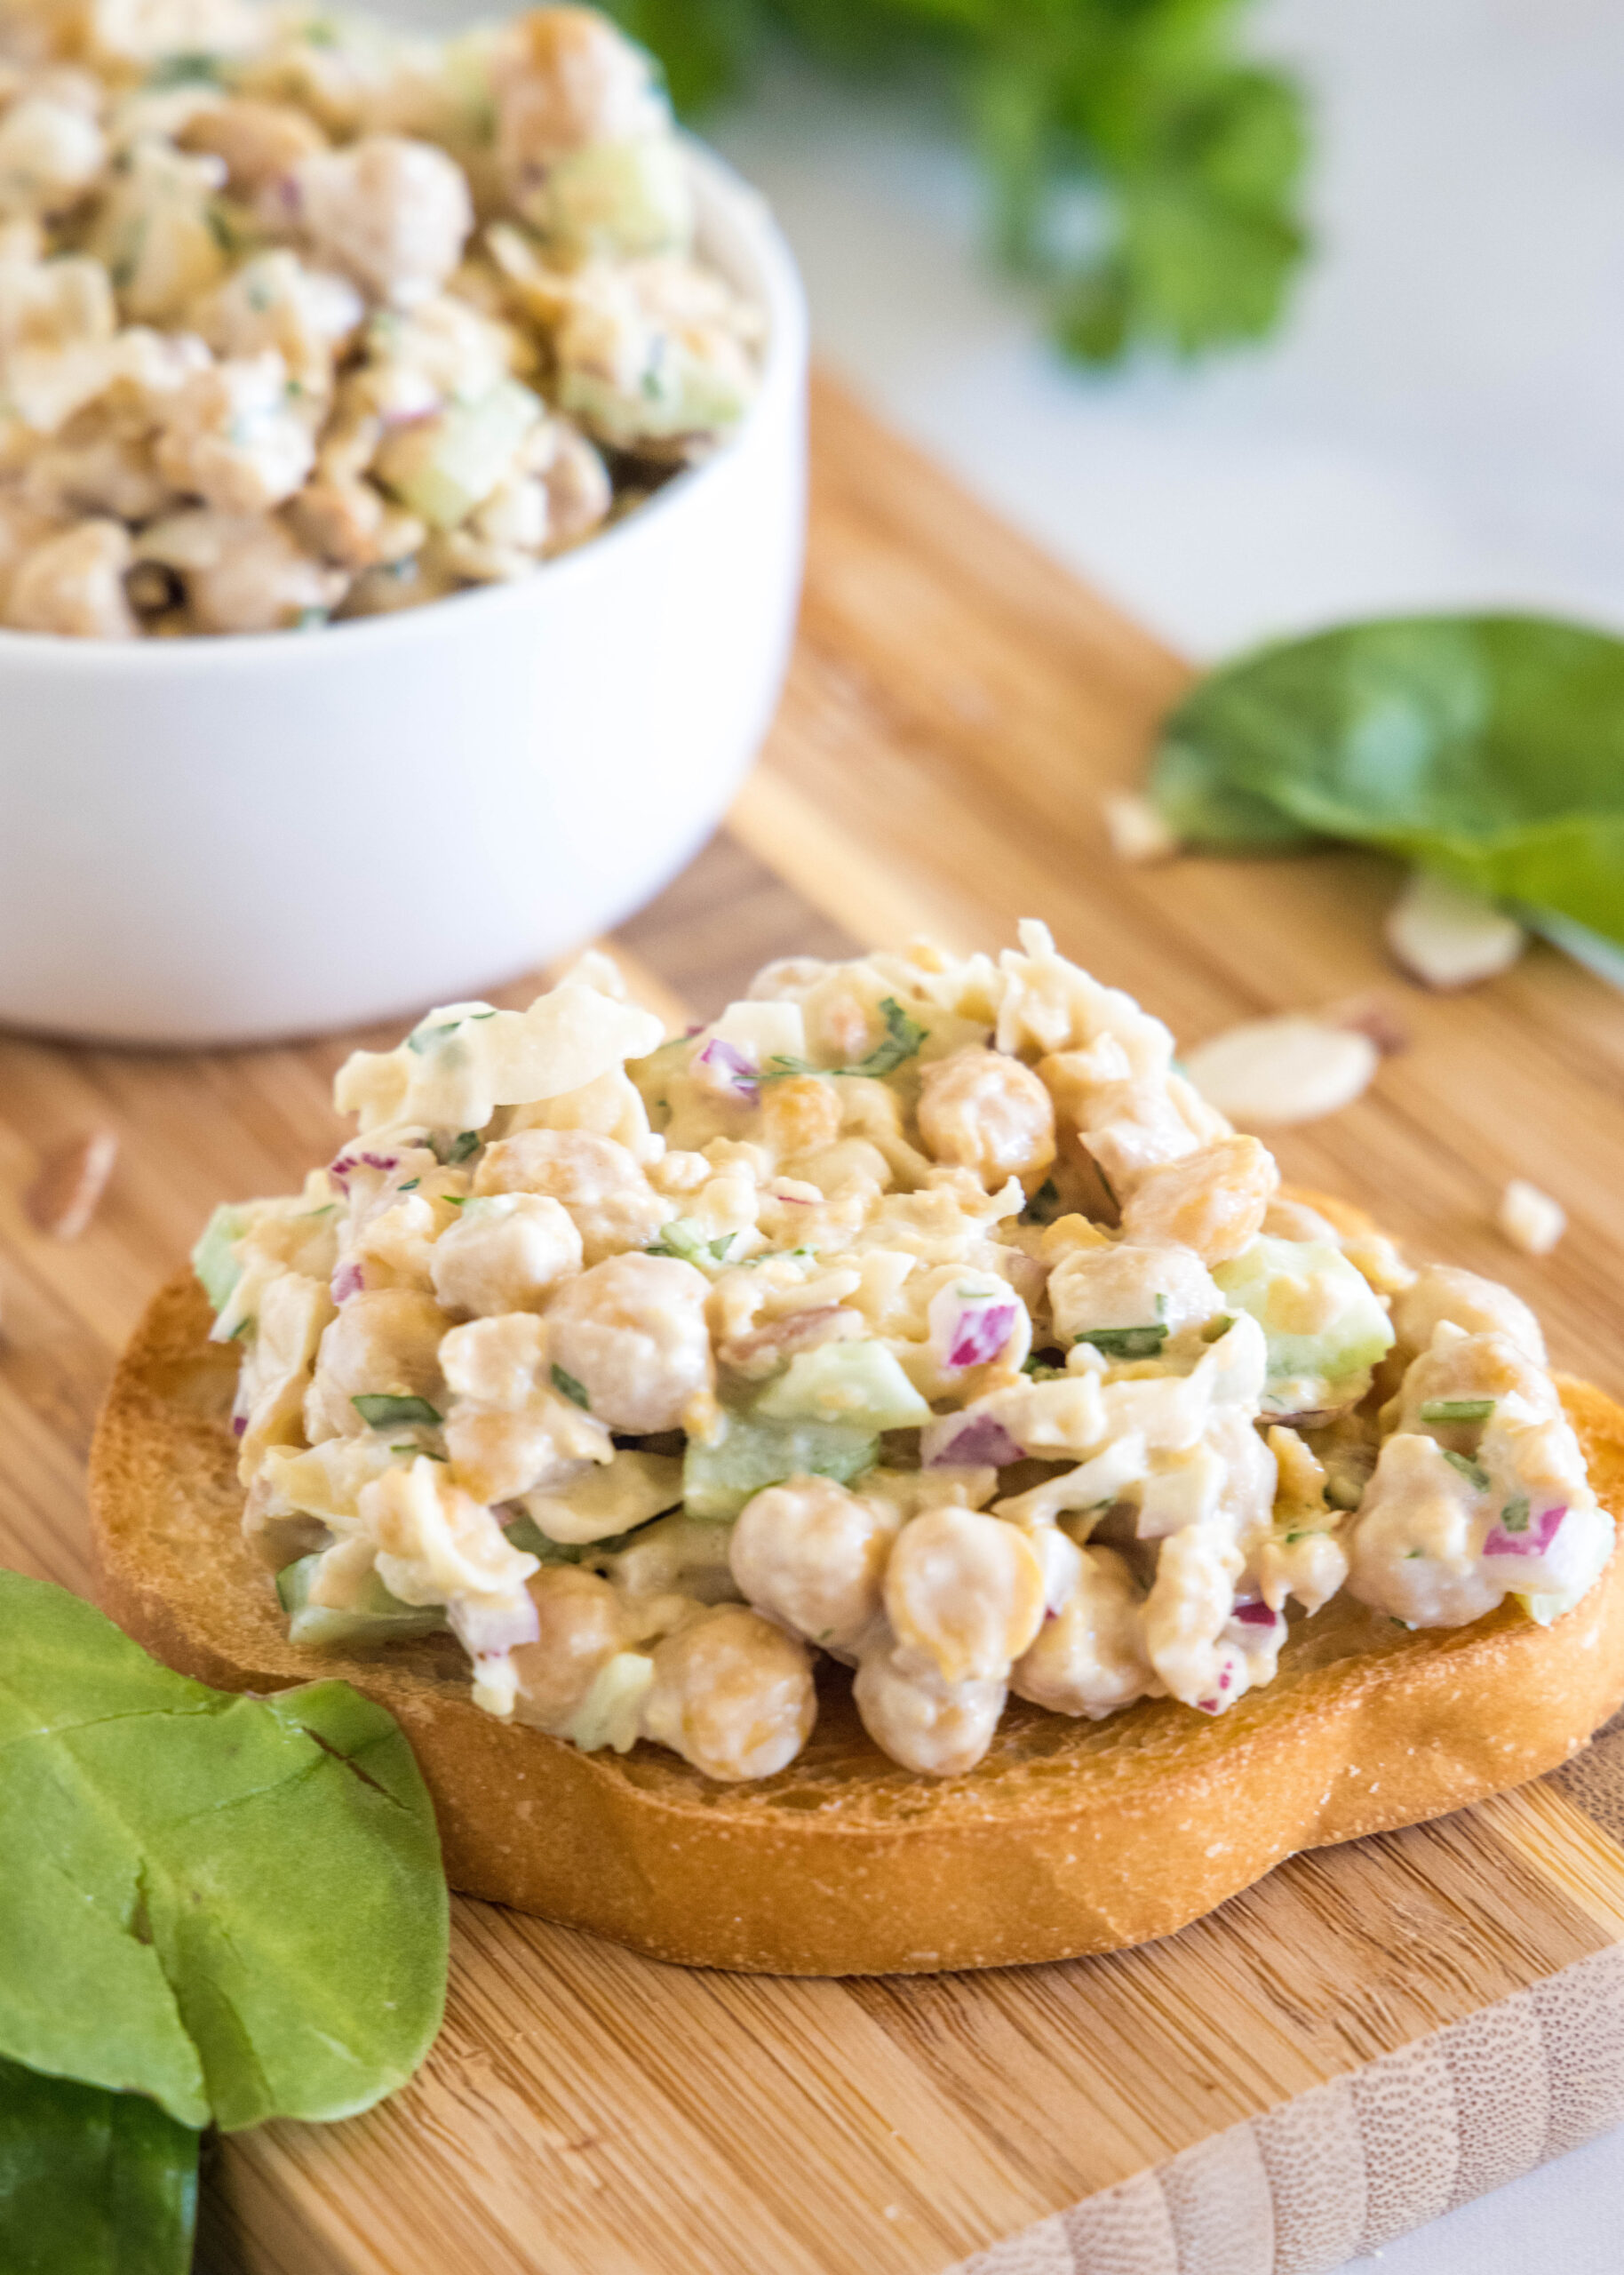 Chickpea chicken salad served on a slice of bread on a wooden cutting board, with a bowl of chickpea salad in the background.